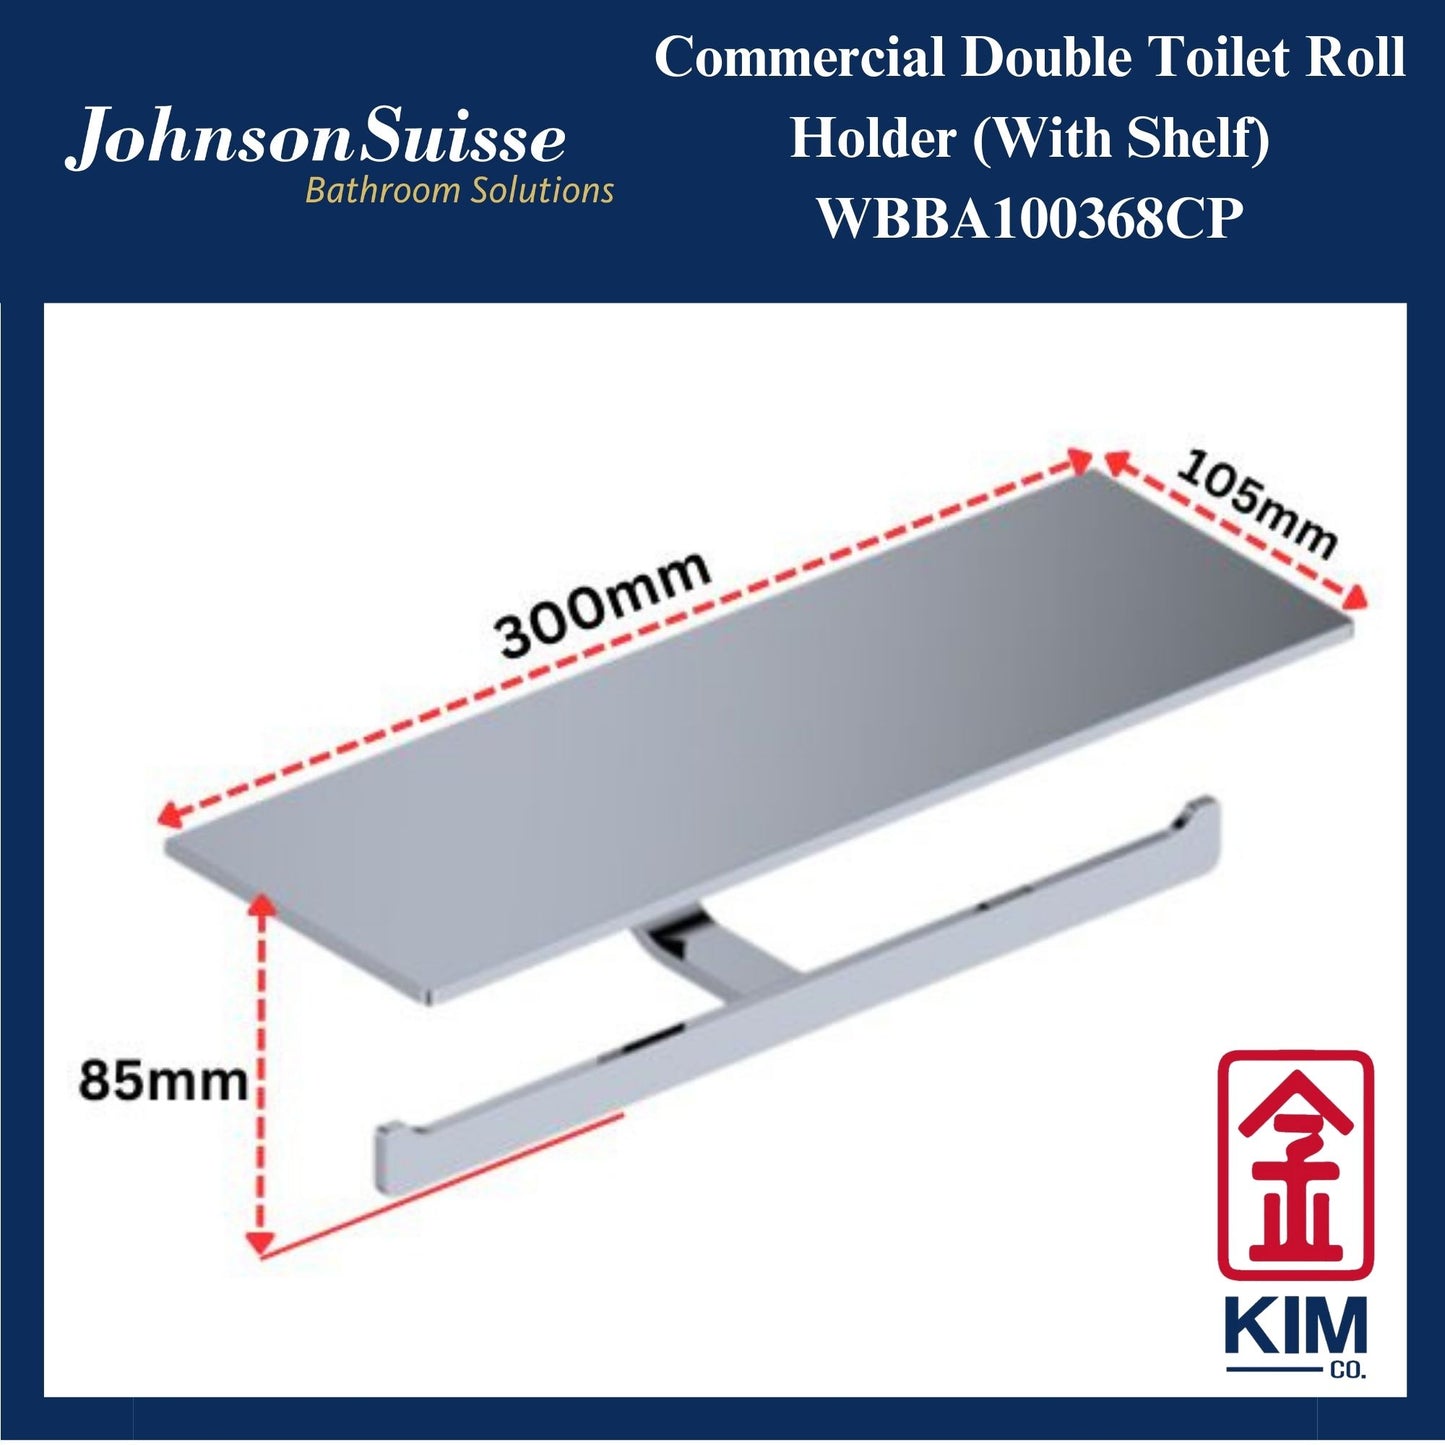 Johnson Suisse Commercial Double Toilet Roll Holder With Shelf (WBBA100368CP)